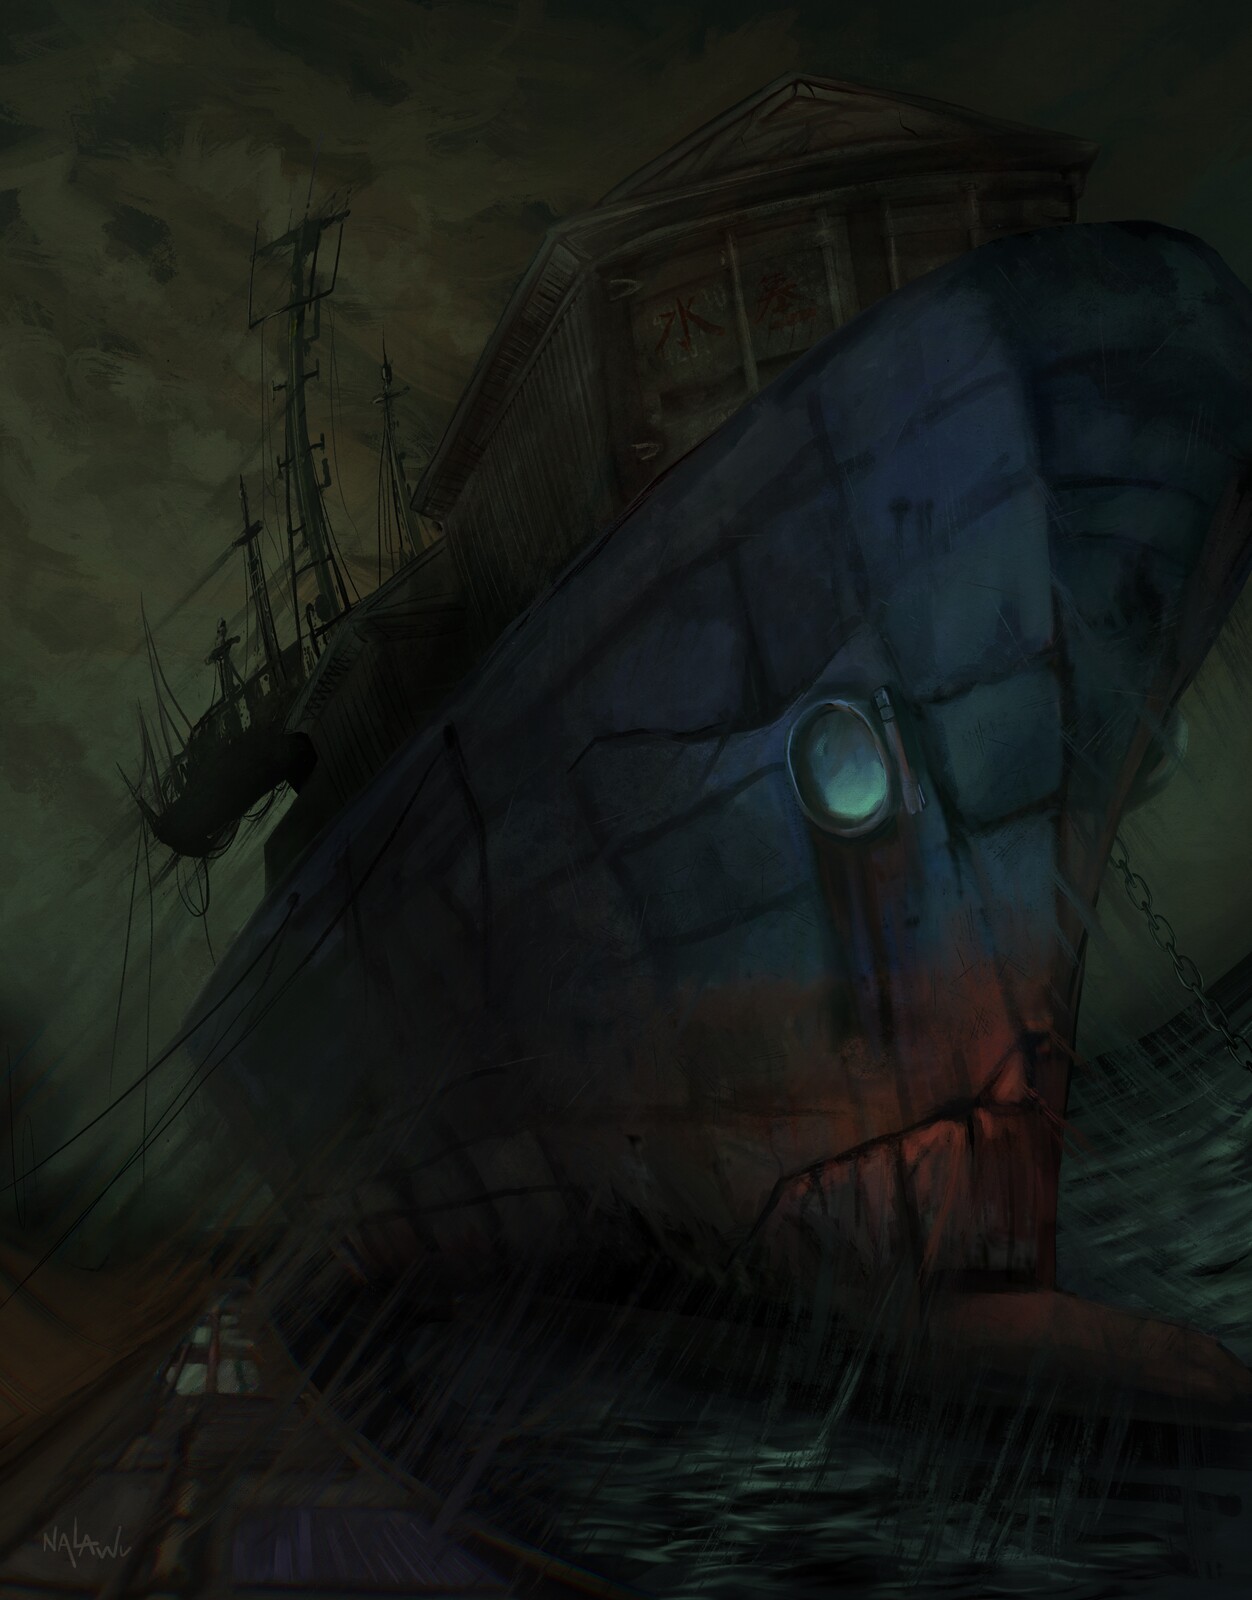 The Ghost Ship 